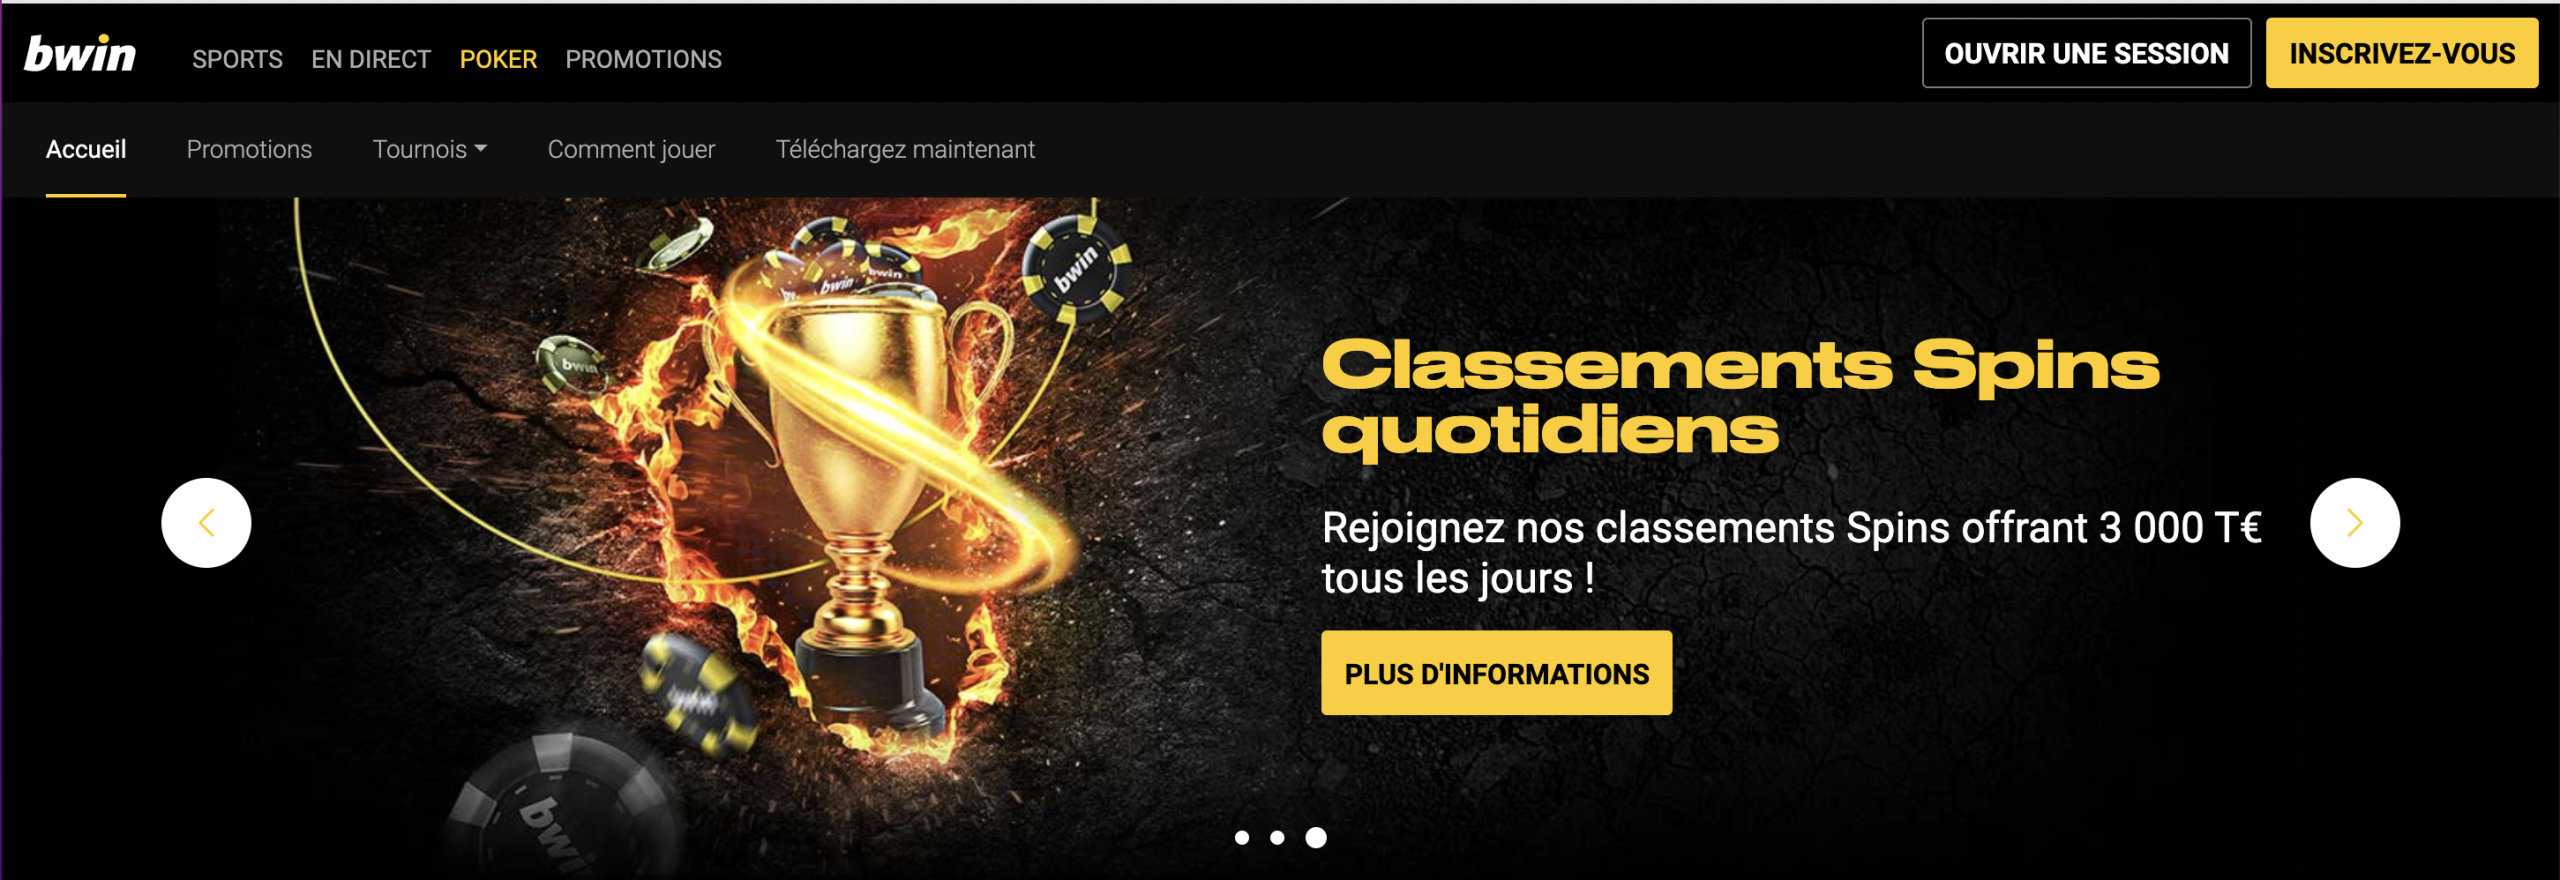 Bwin - page d'acceuil